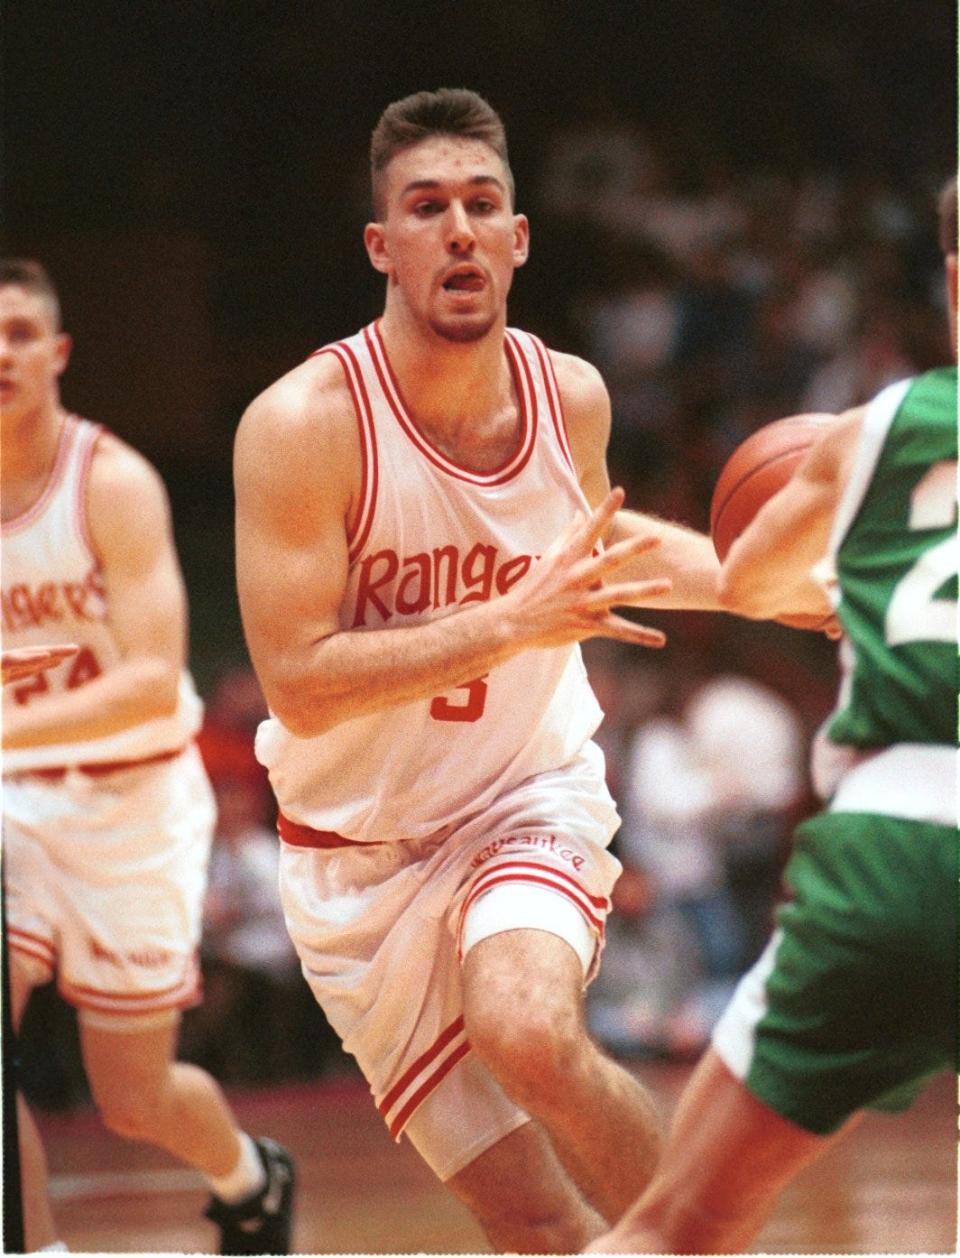 Anthony Pieper scored 3,391 points during his career at Wausaukee High School, the top scoring mark in state boys high school basketball history.